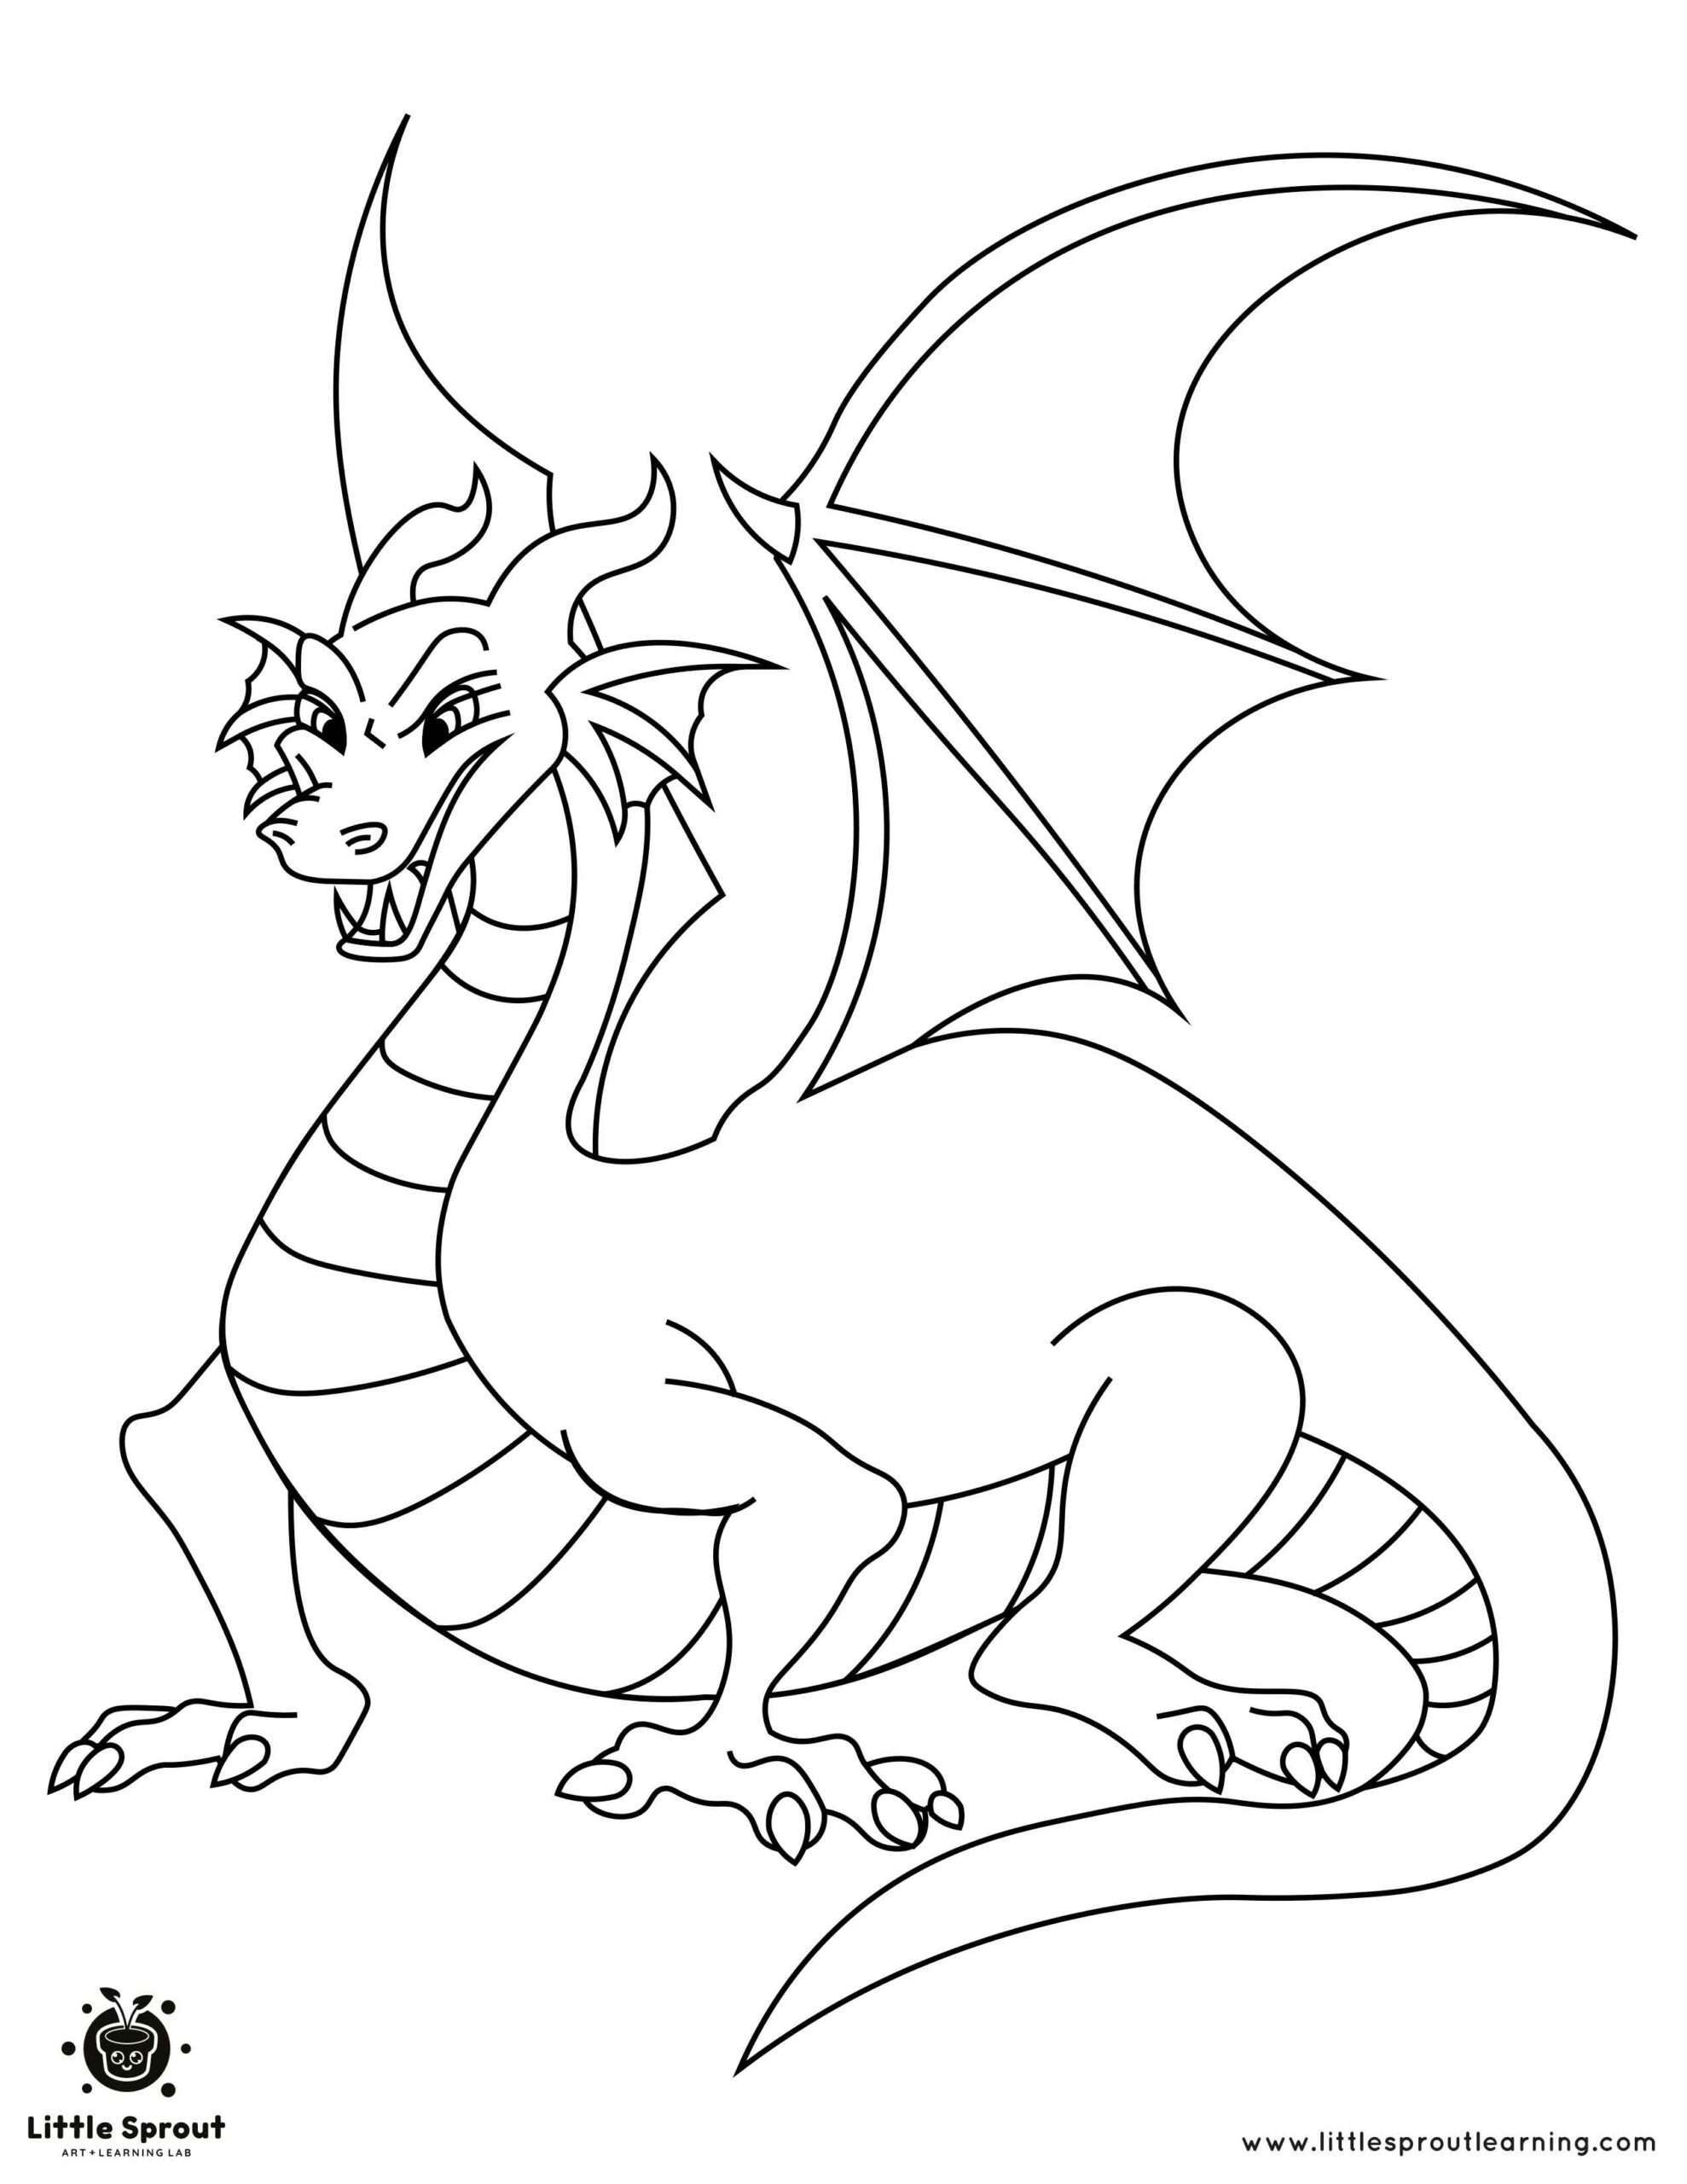 Coloring Page Dragon 1 Little Sprout Learning scaled